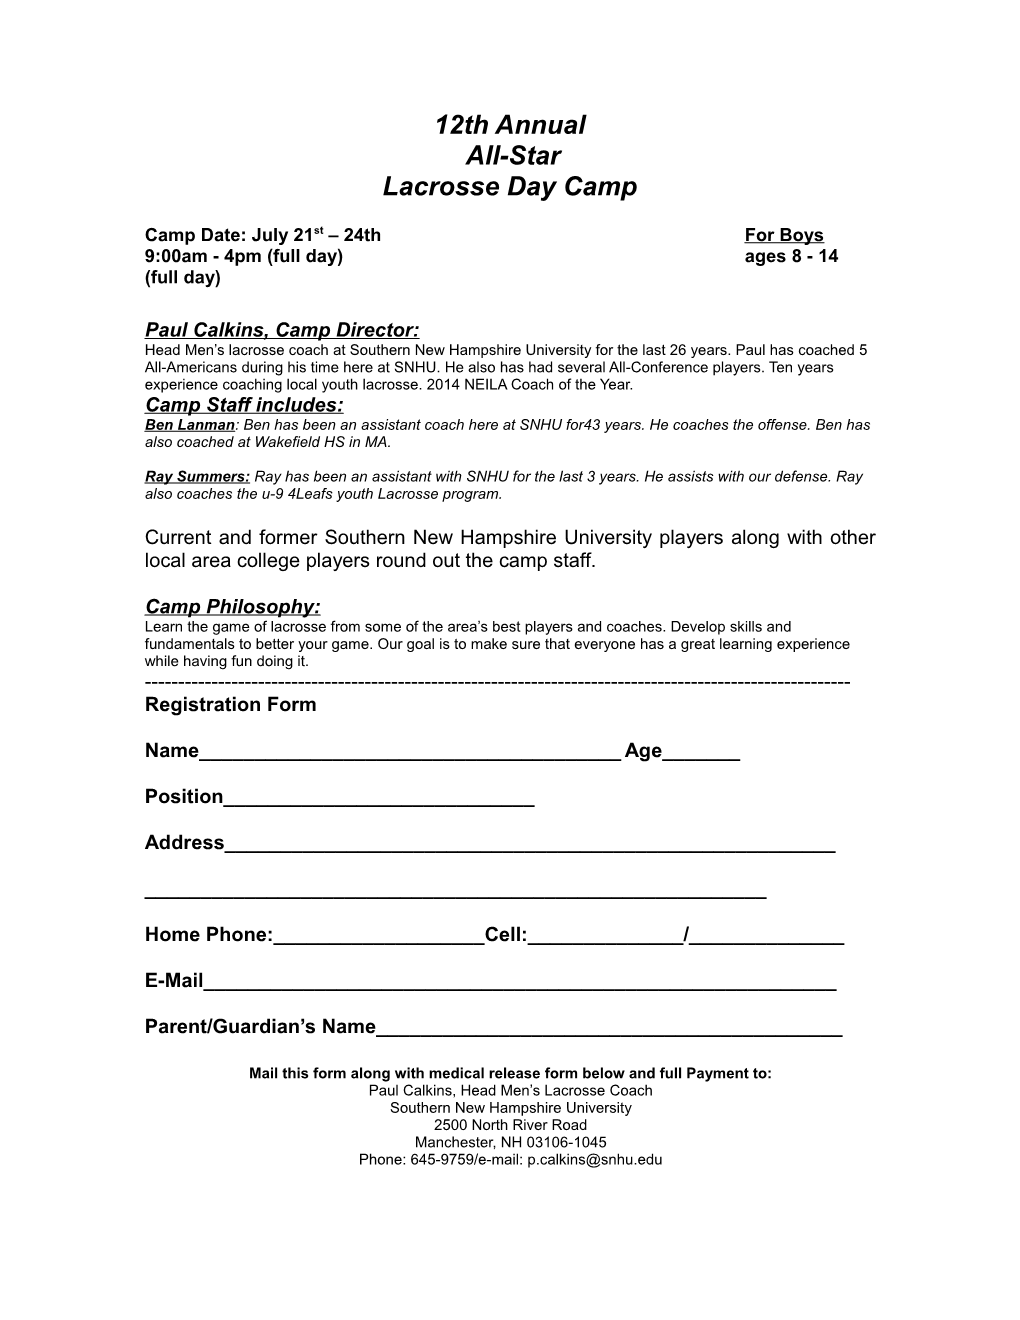 Southern New Hampshire All-Star Lacrosse Camp